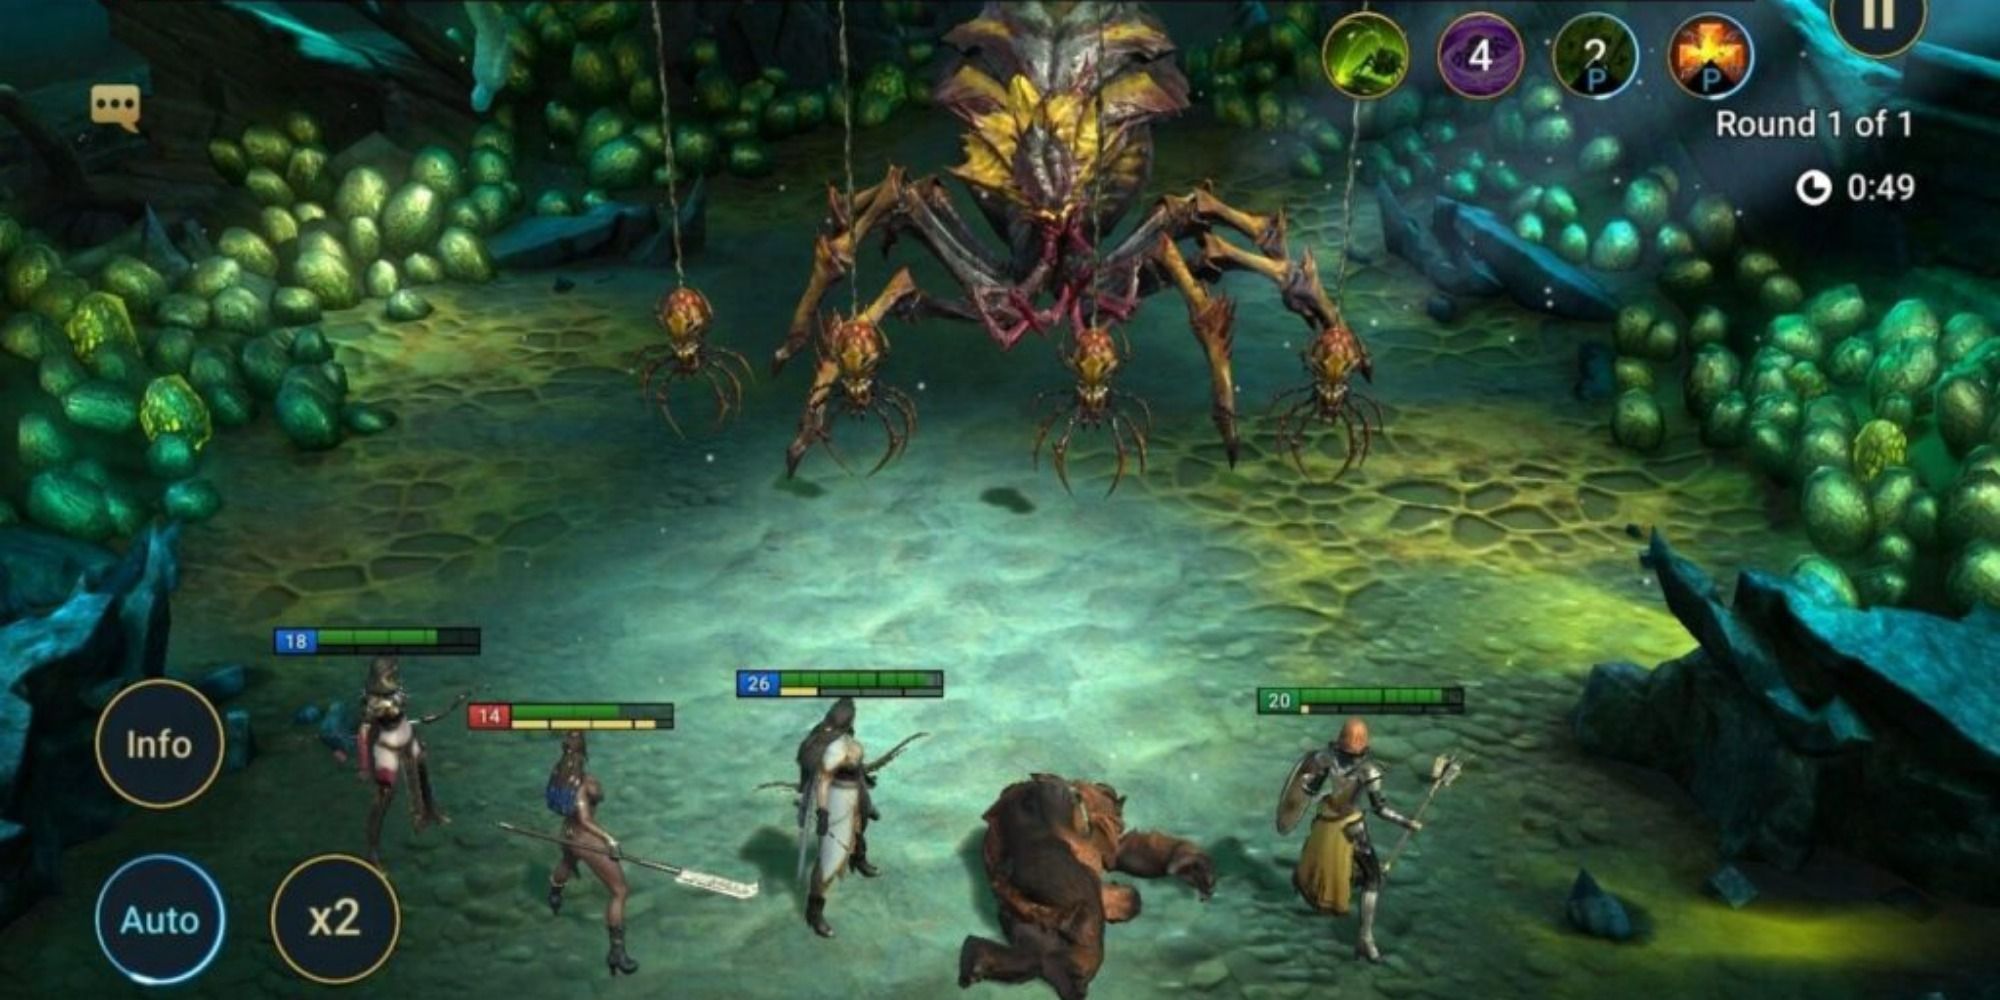 A team of heroes faces off against a spider monster in a cave